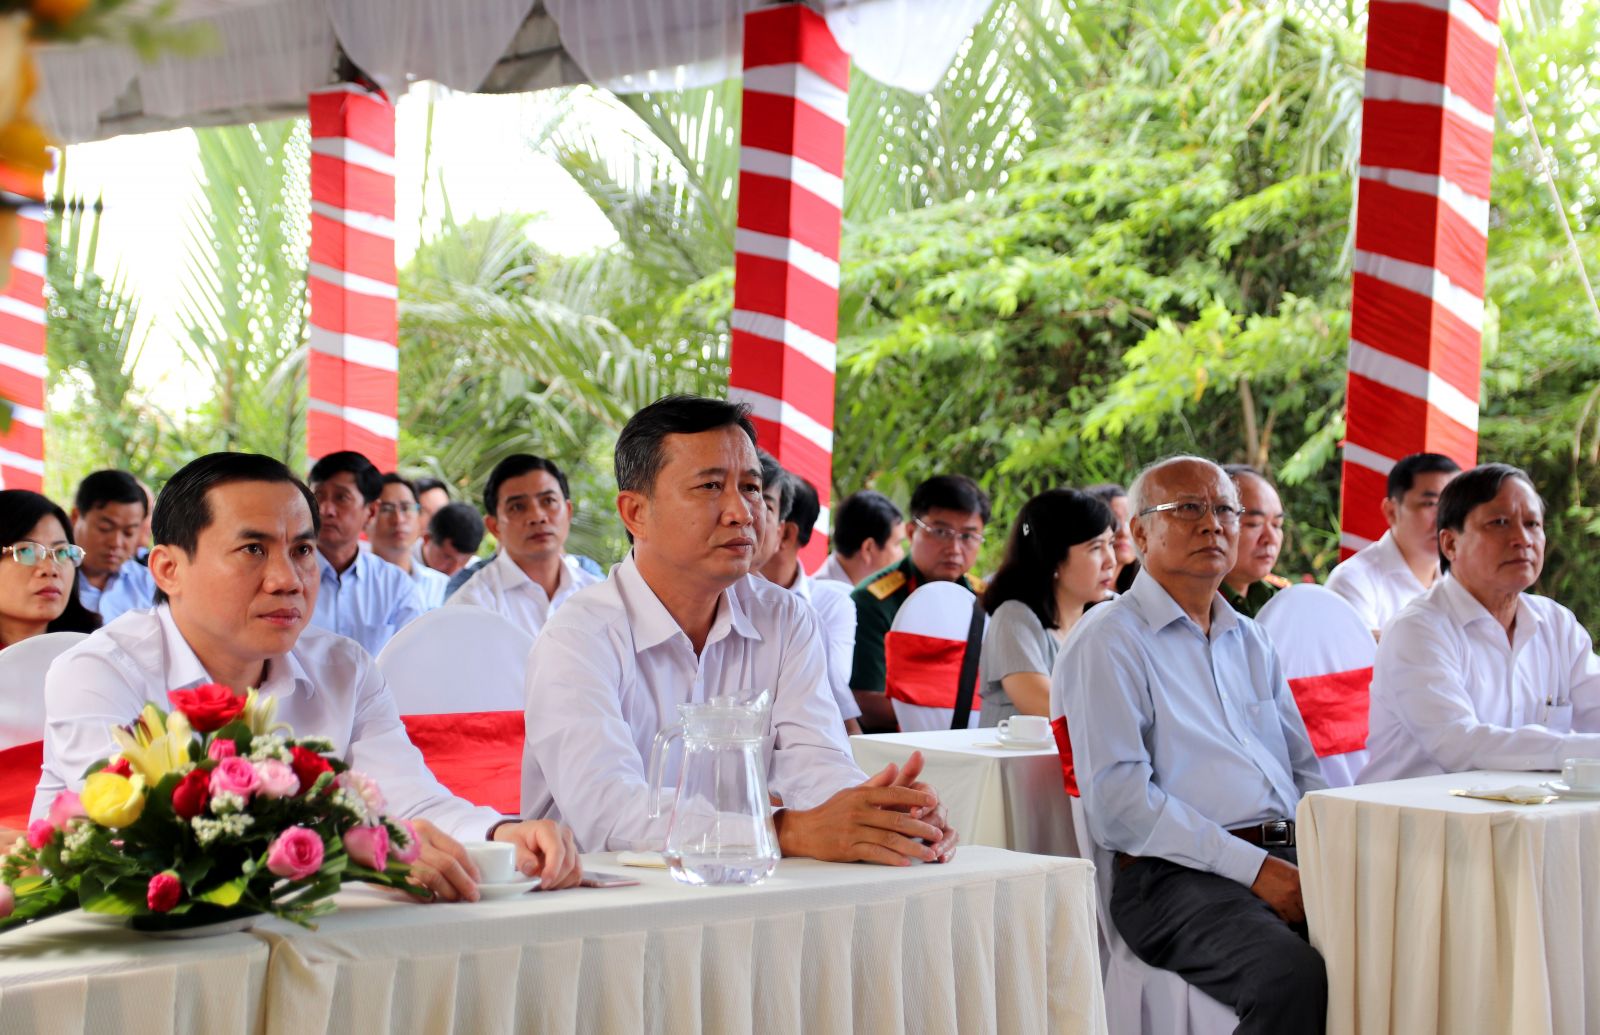 Delegates attend the ceremony about the commencement of Bao Dinh River's Embankment Project (the section from Bao Dinh sluice to the first sluice of Ring Road canal)